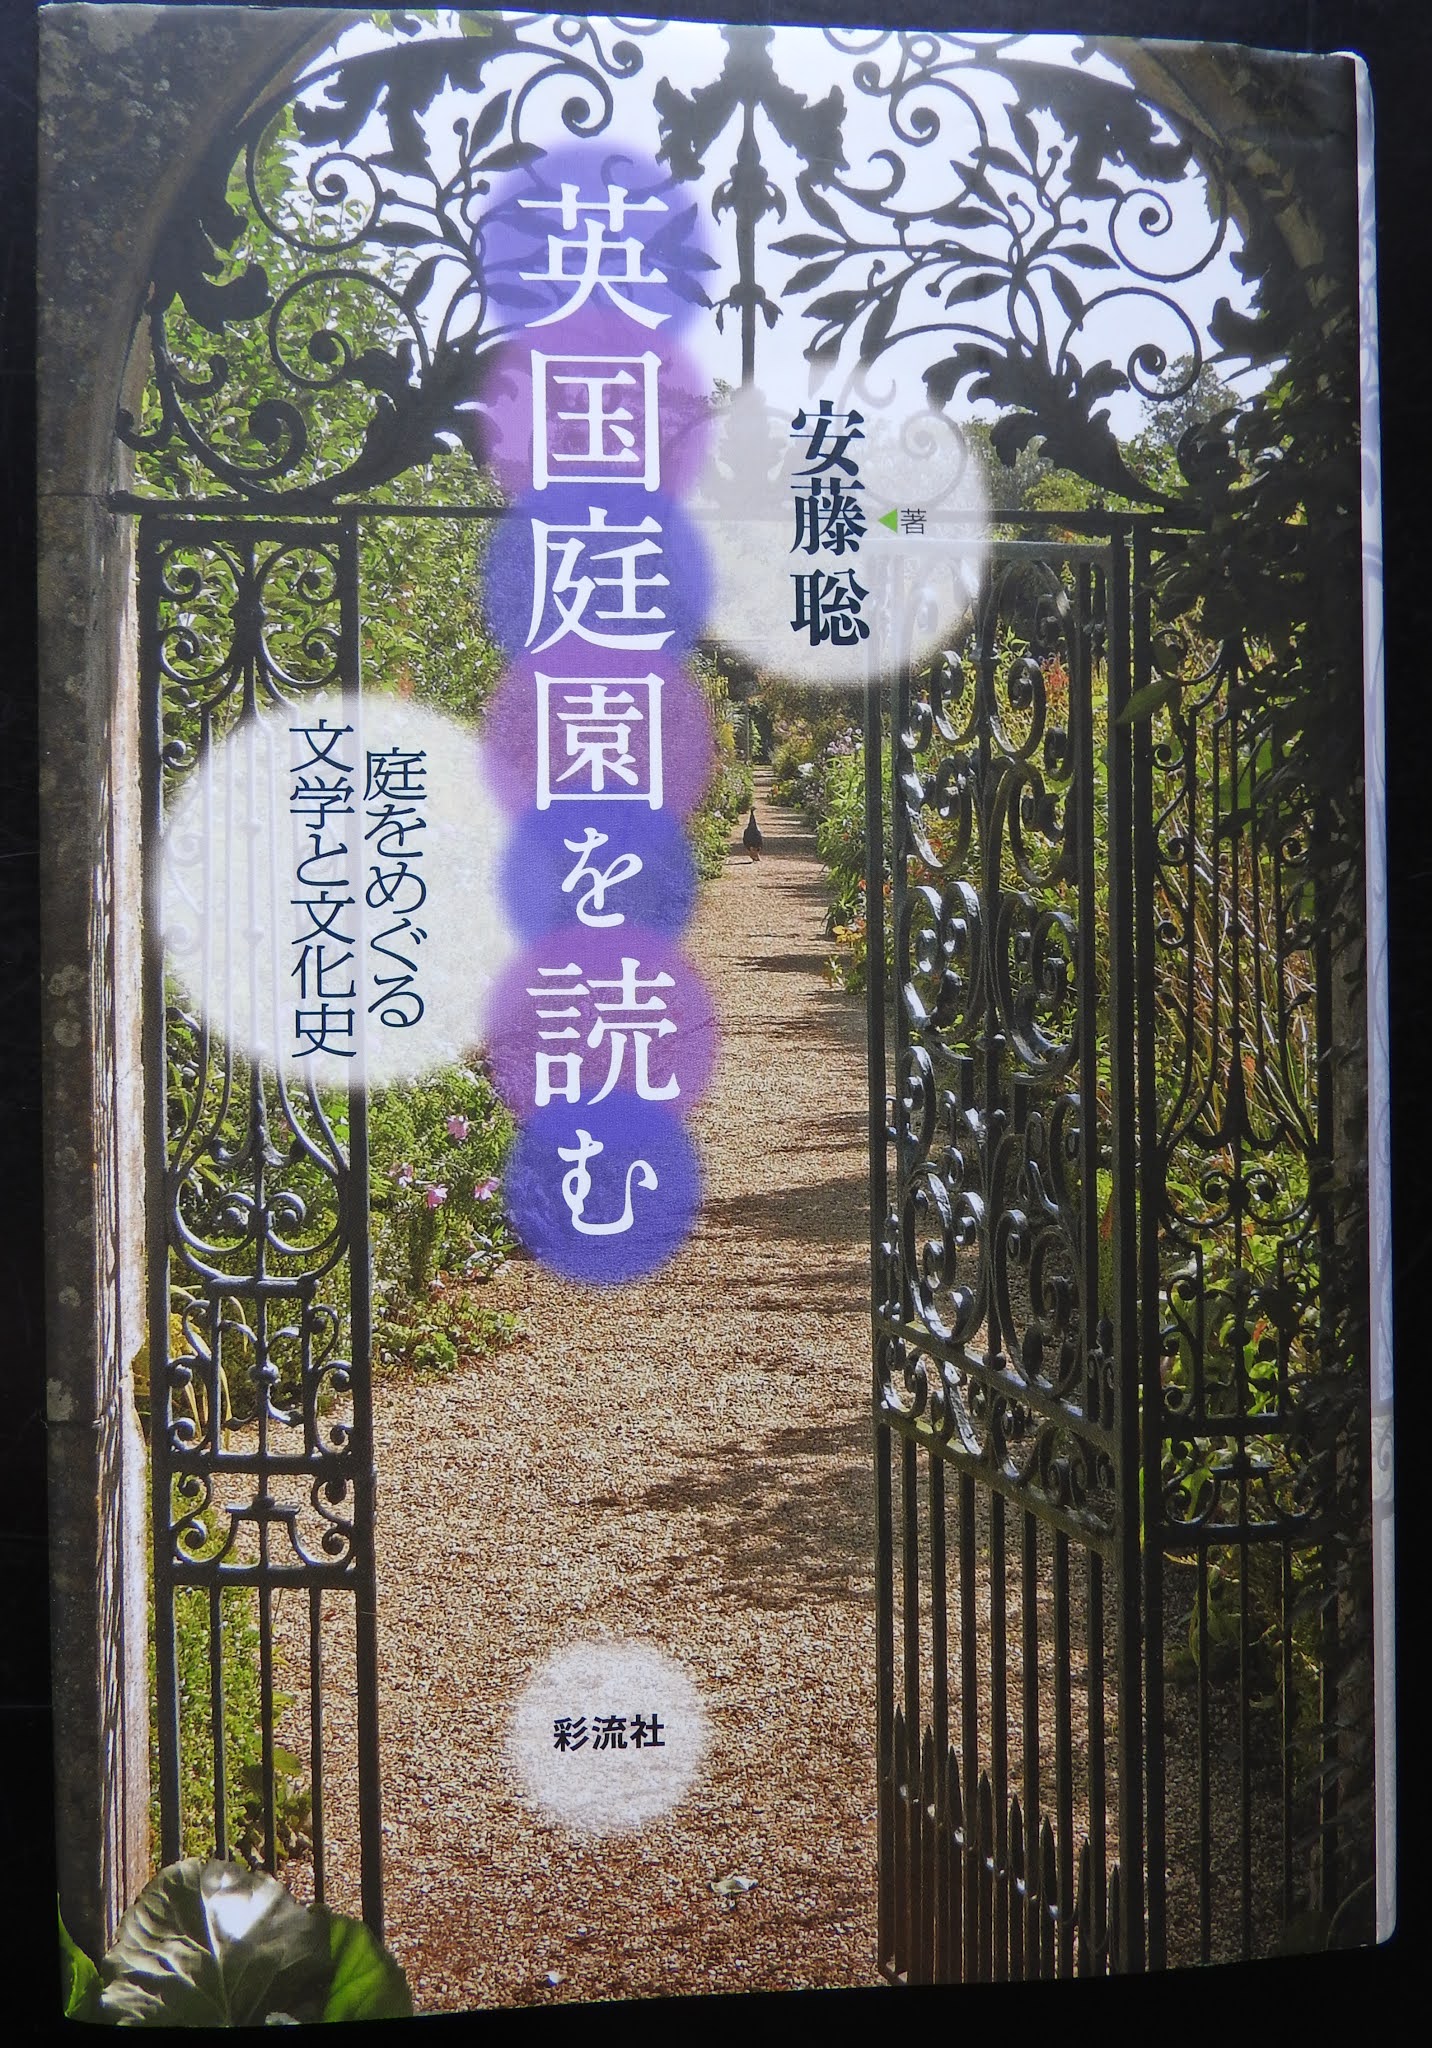 Coonie S Diary 10 21 21年2月11日 本 英国庭園を読む Book Reading The English Garden 11th Of February 21